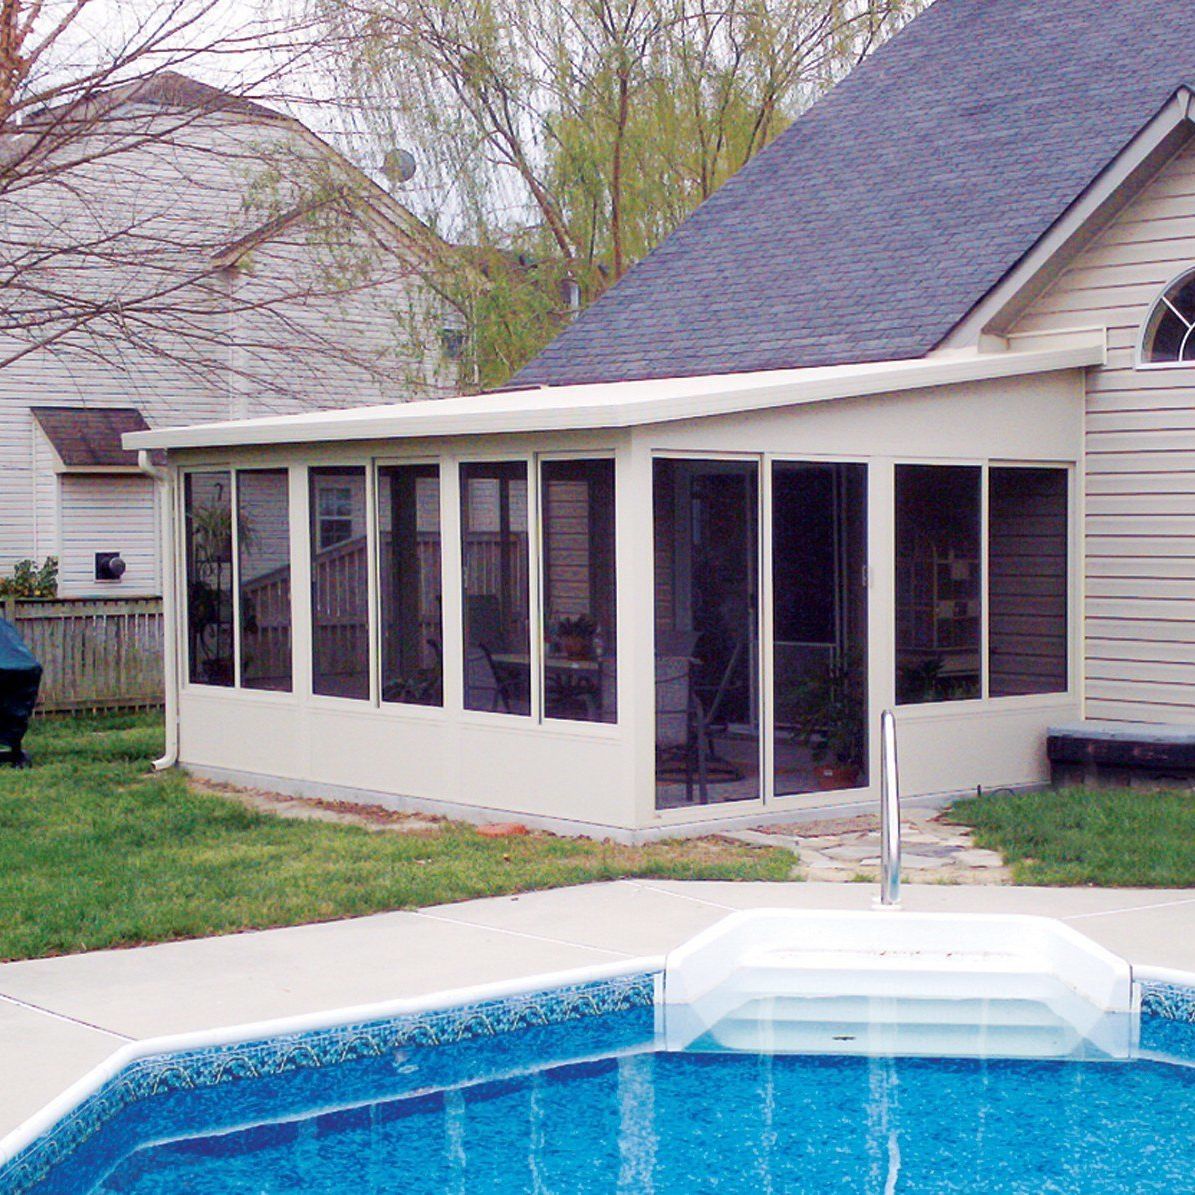 A house with a screened in porch next to a swimming pool